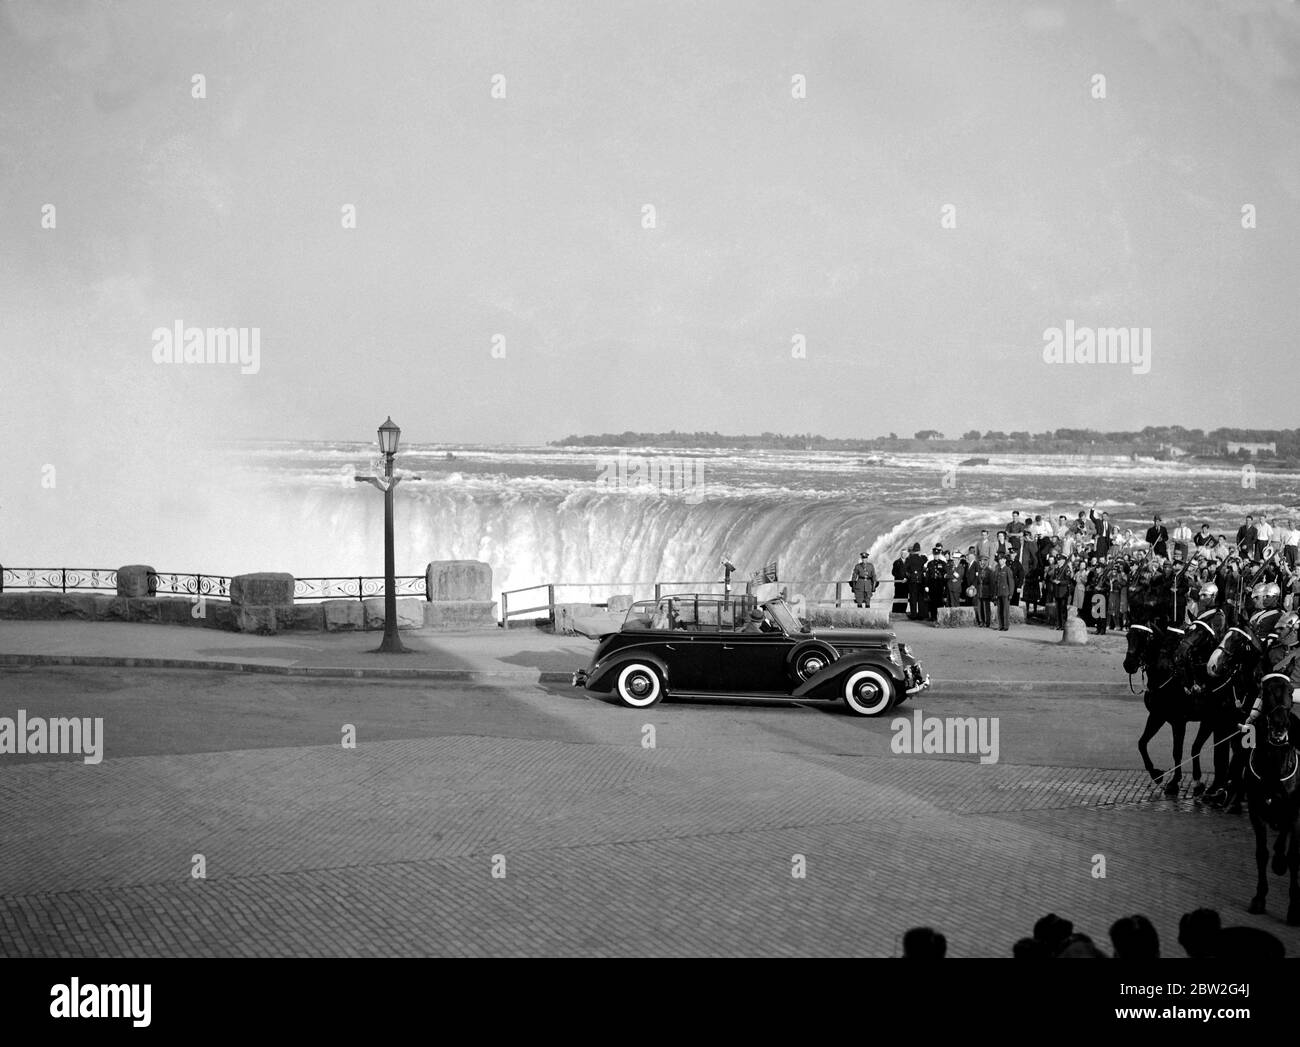 The Royal tour of Canada and the USA by King George VI and Queen Elizabeth , 1939. The King and Queen visit Niagara Falls, Ontario before crossing into the United States. The Royal party driving by Horseshoe Falls. Stock Photo